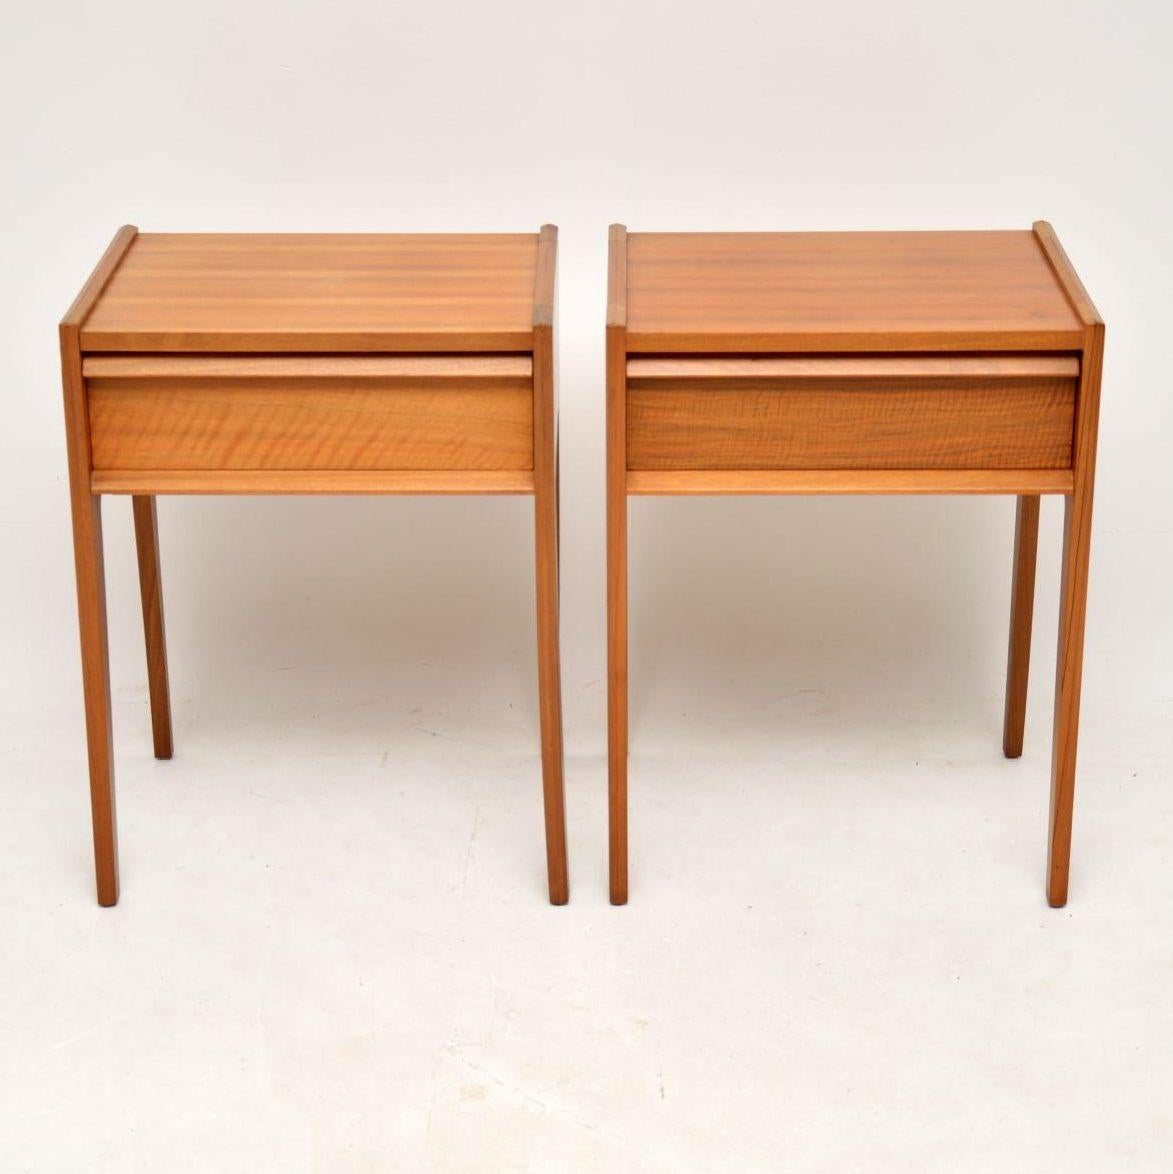 A stylish, rare and extremely well made pair of vintage bedside tables in walnut, these were made by Younger, they date from the 1960s. They are in great original condition, with only some very minor wear and one or two very light marks. They have a